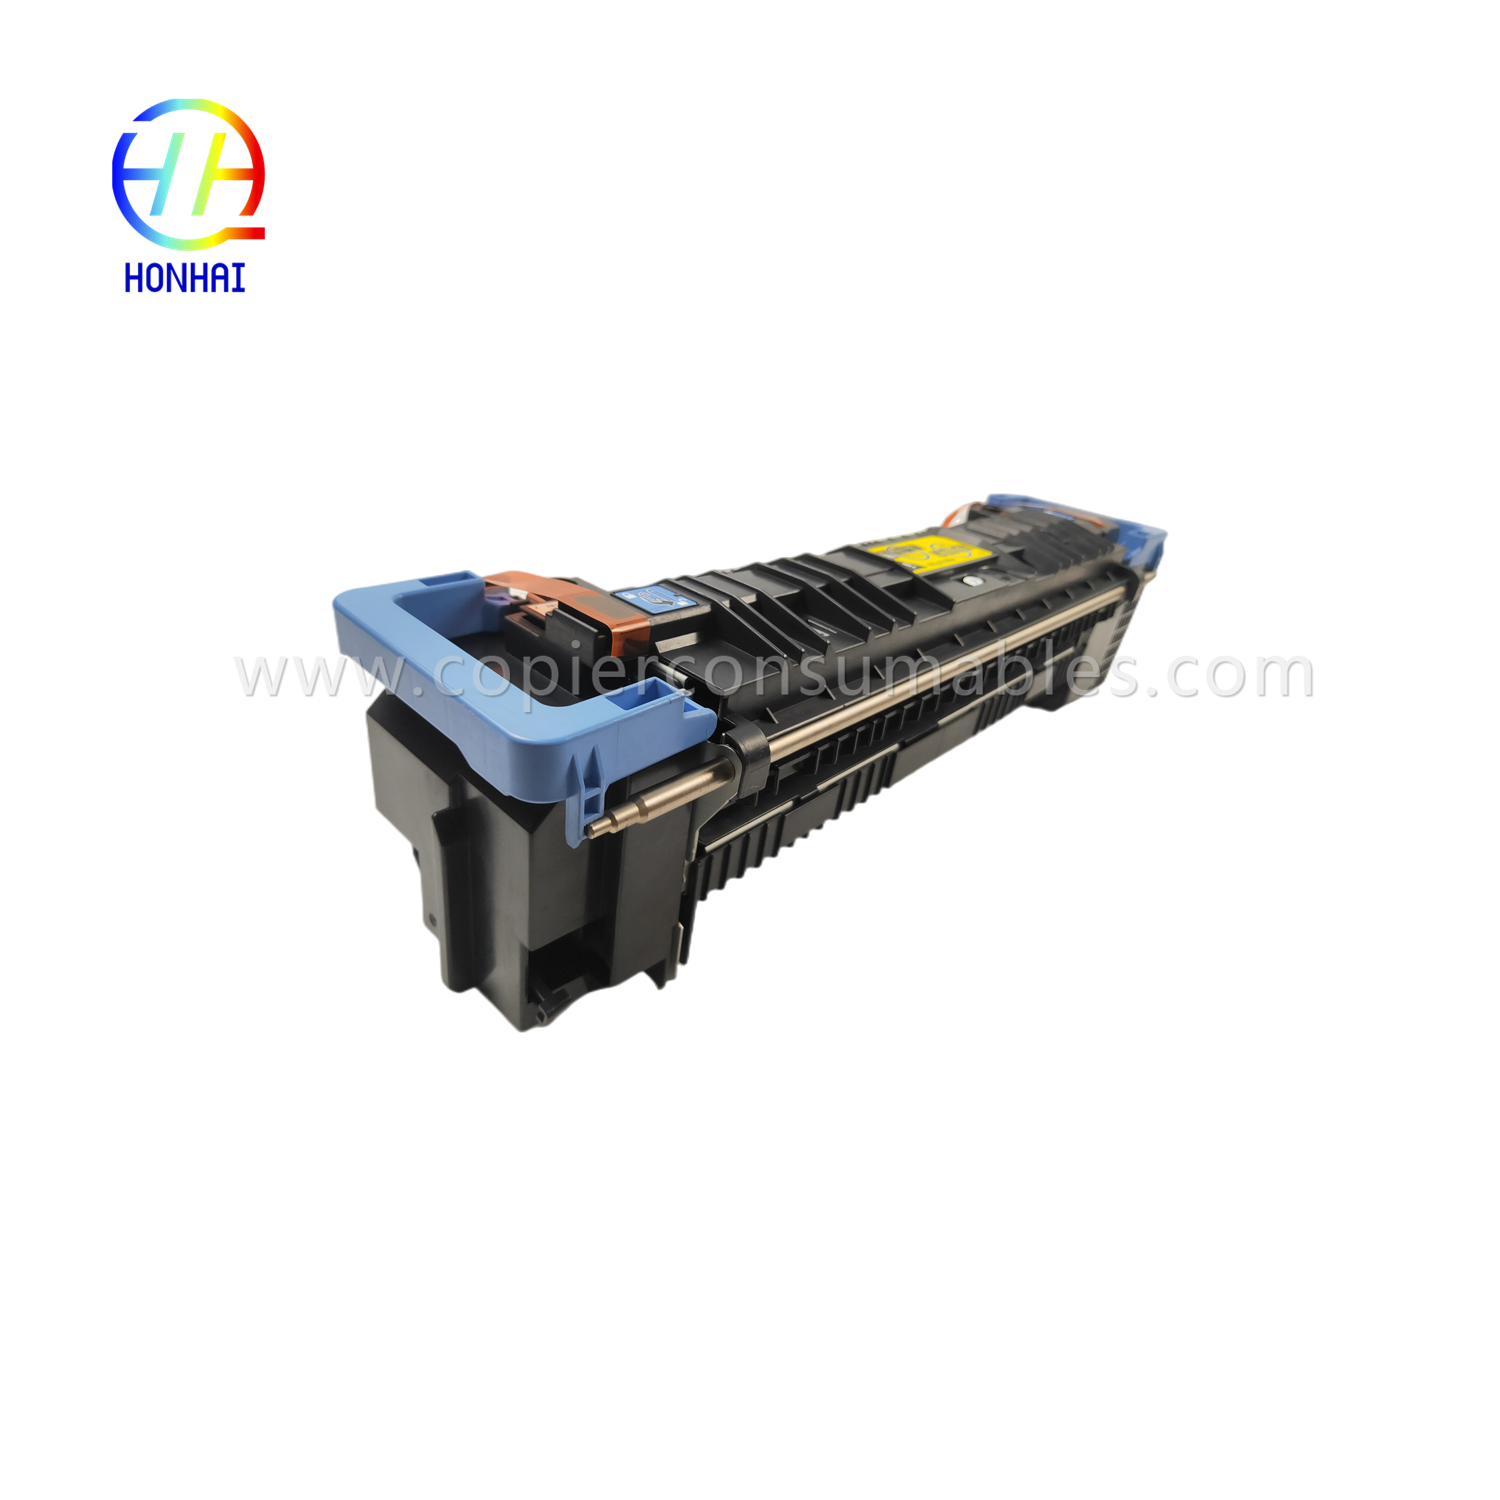 https://www.copierconsumables.com/fuser-assembly-unit-for-hp-m855-m880-m855dn-m855xh-m880z-m880z-c1n54-67901-c1n58-67901-fusing-heating-assy-fixing/